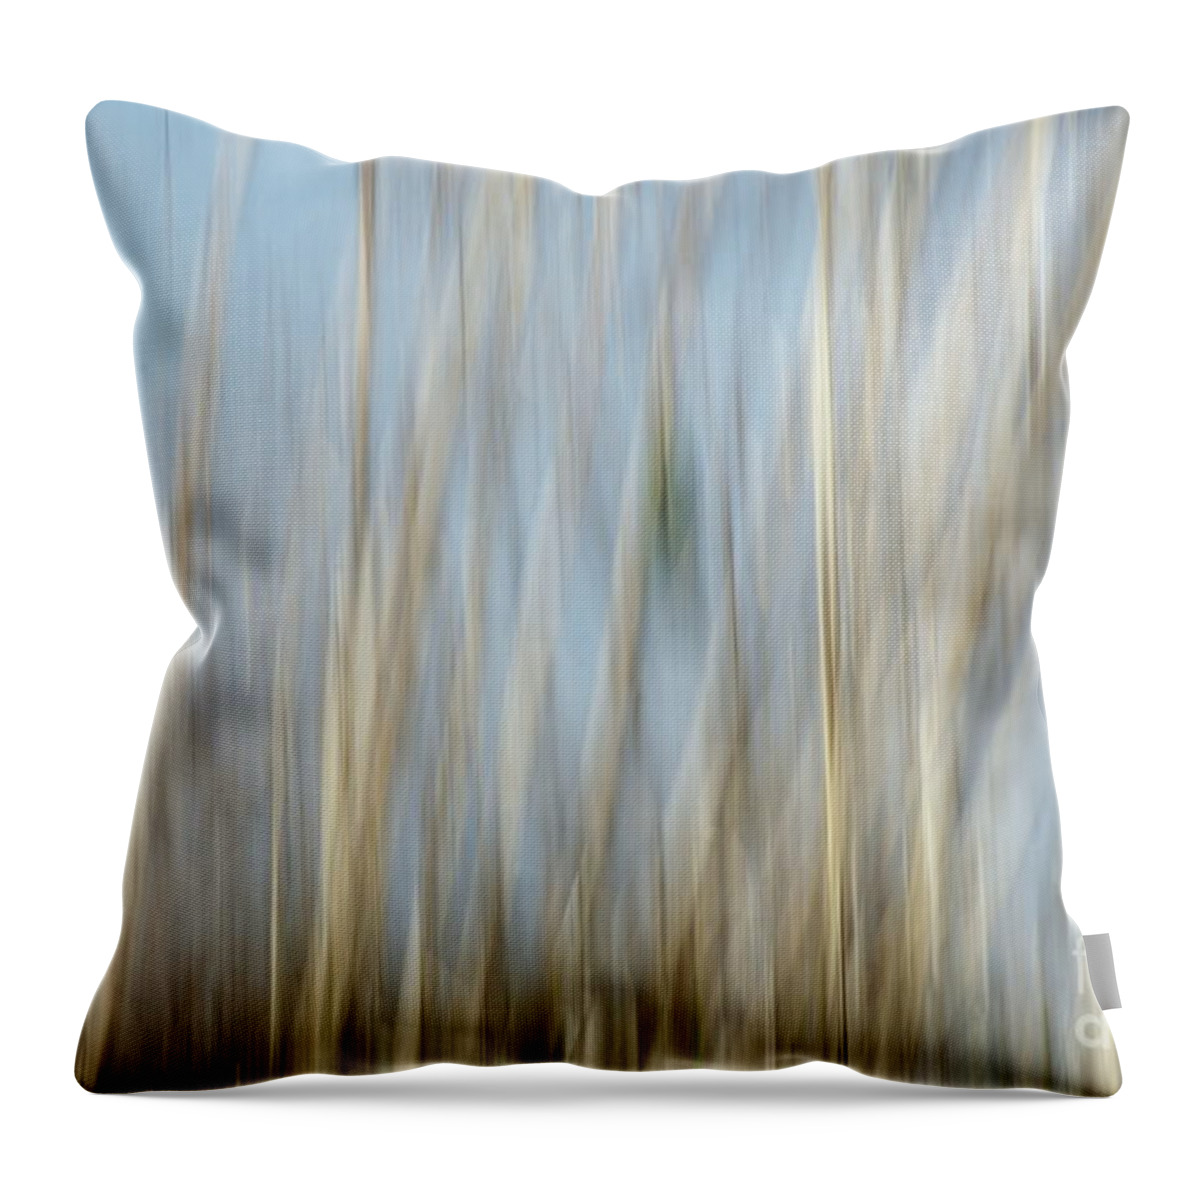 North Carolina Throw Pillow featuring the photograph Sawgrass in Motion by Benanne Stiens